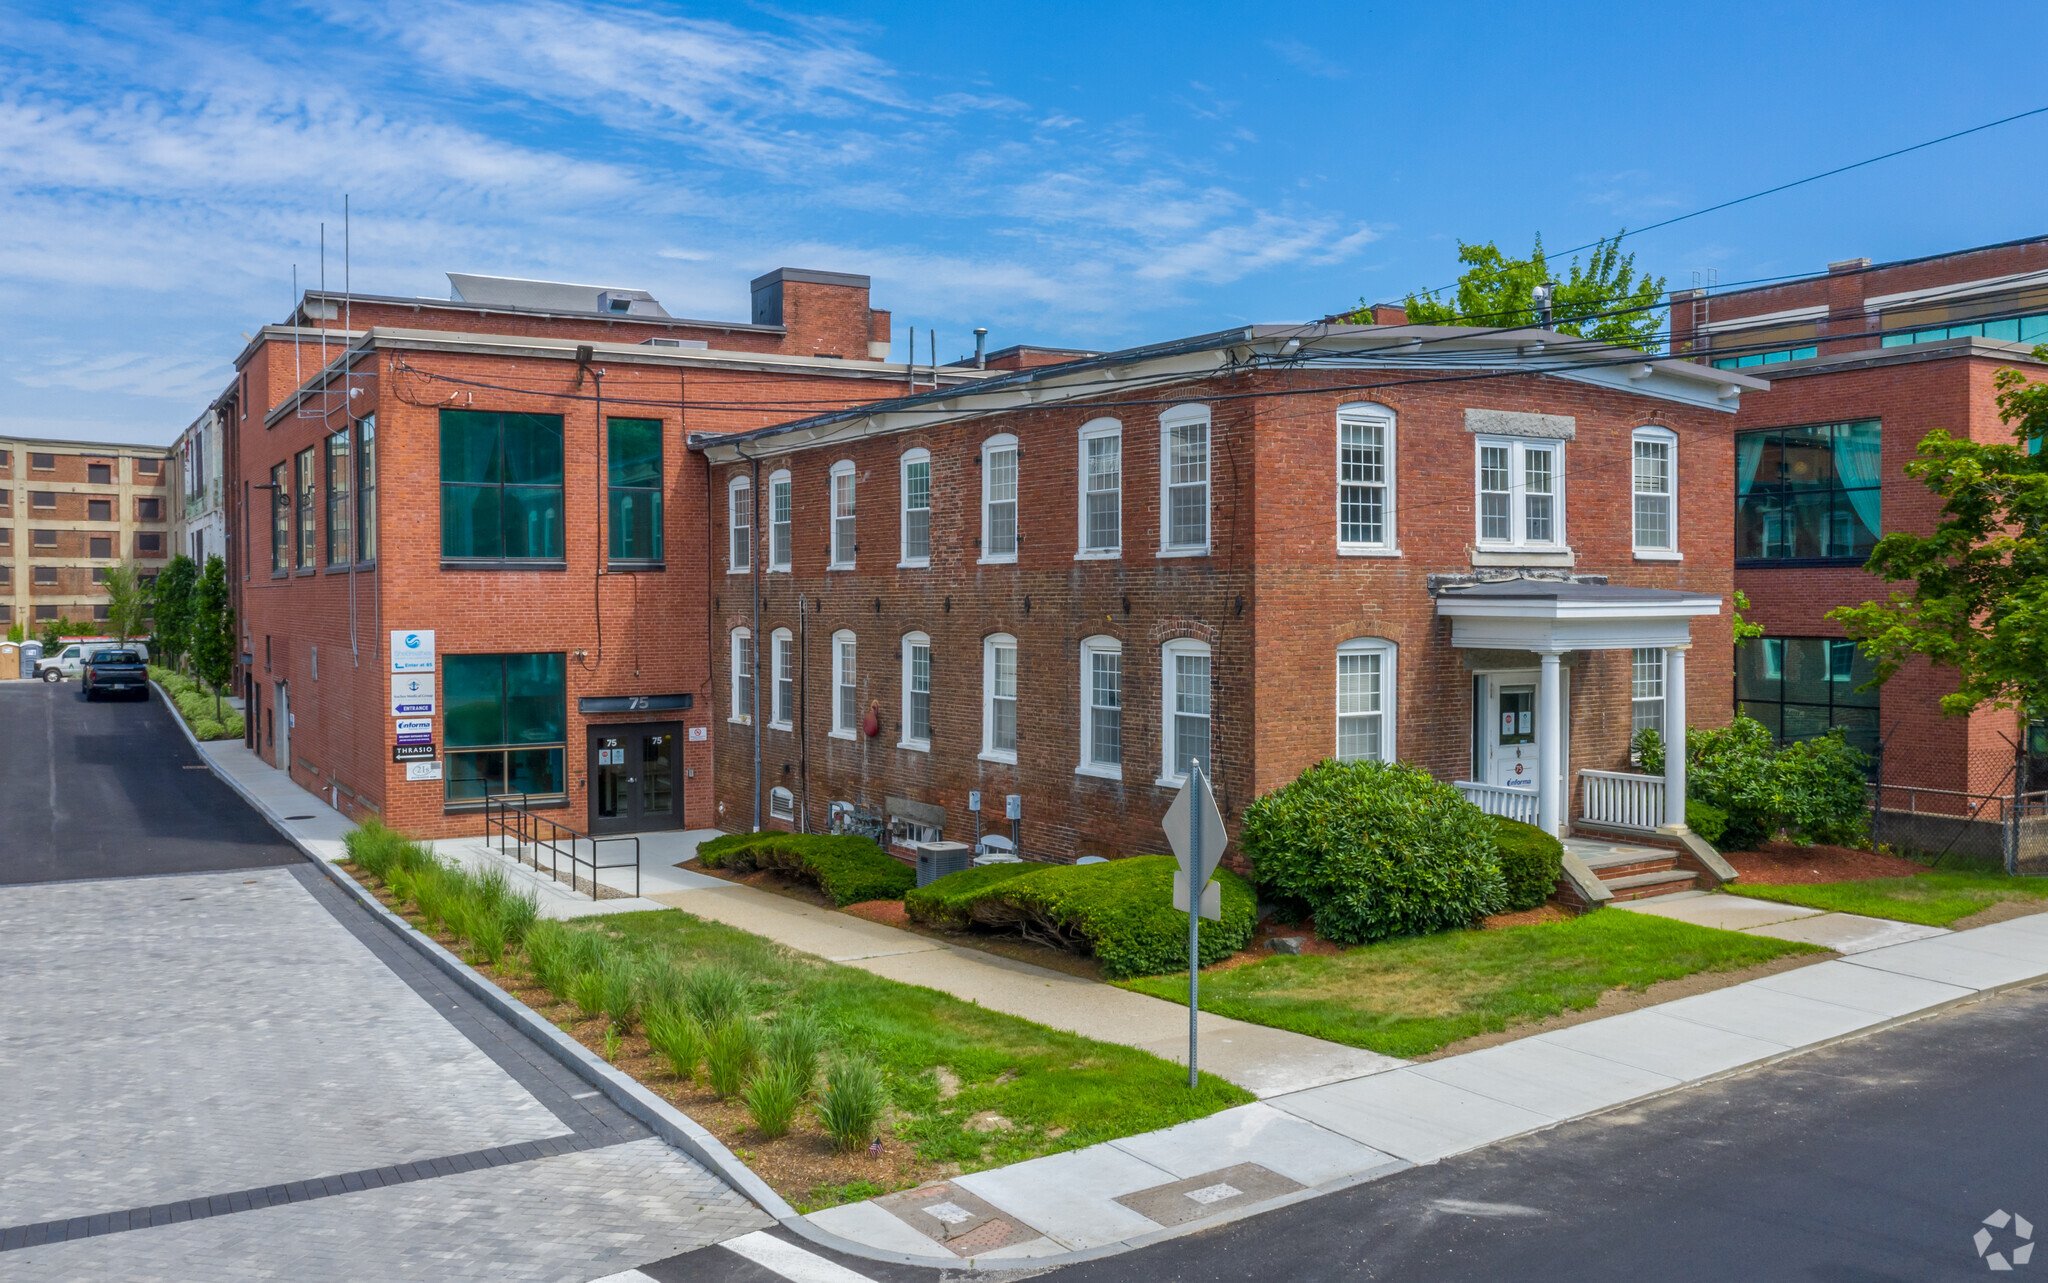 55-West-St-Walpole-MA-Historic-Brick-Buildings-with-Extensive-Improvements-7-LargeHighDefinition.jpg